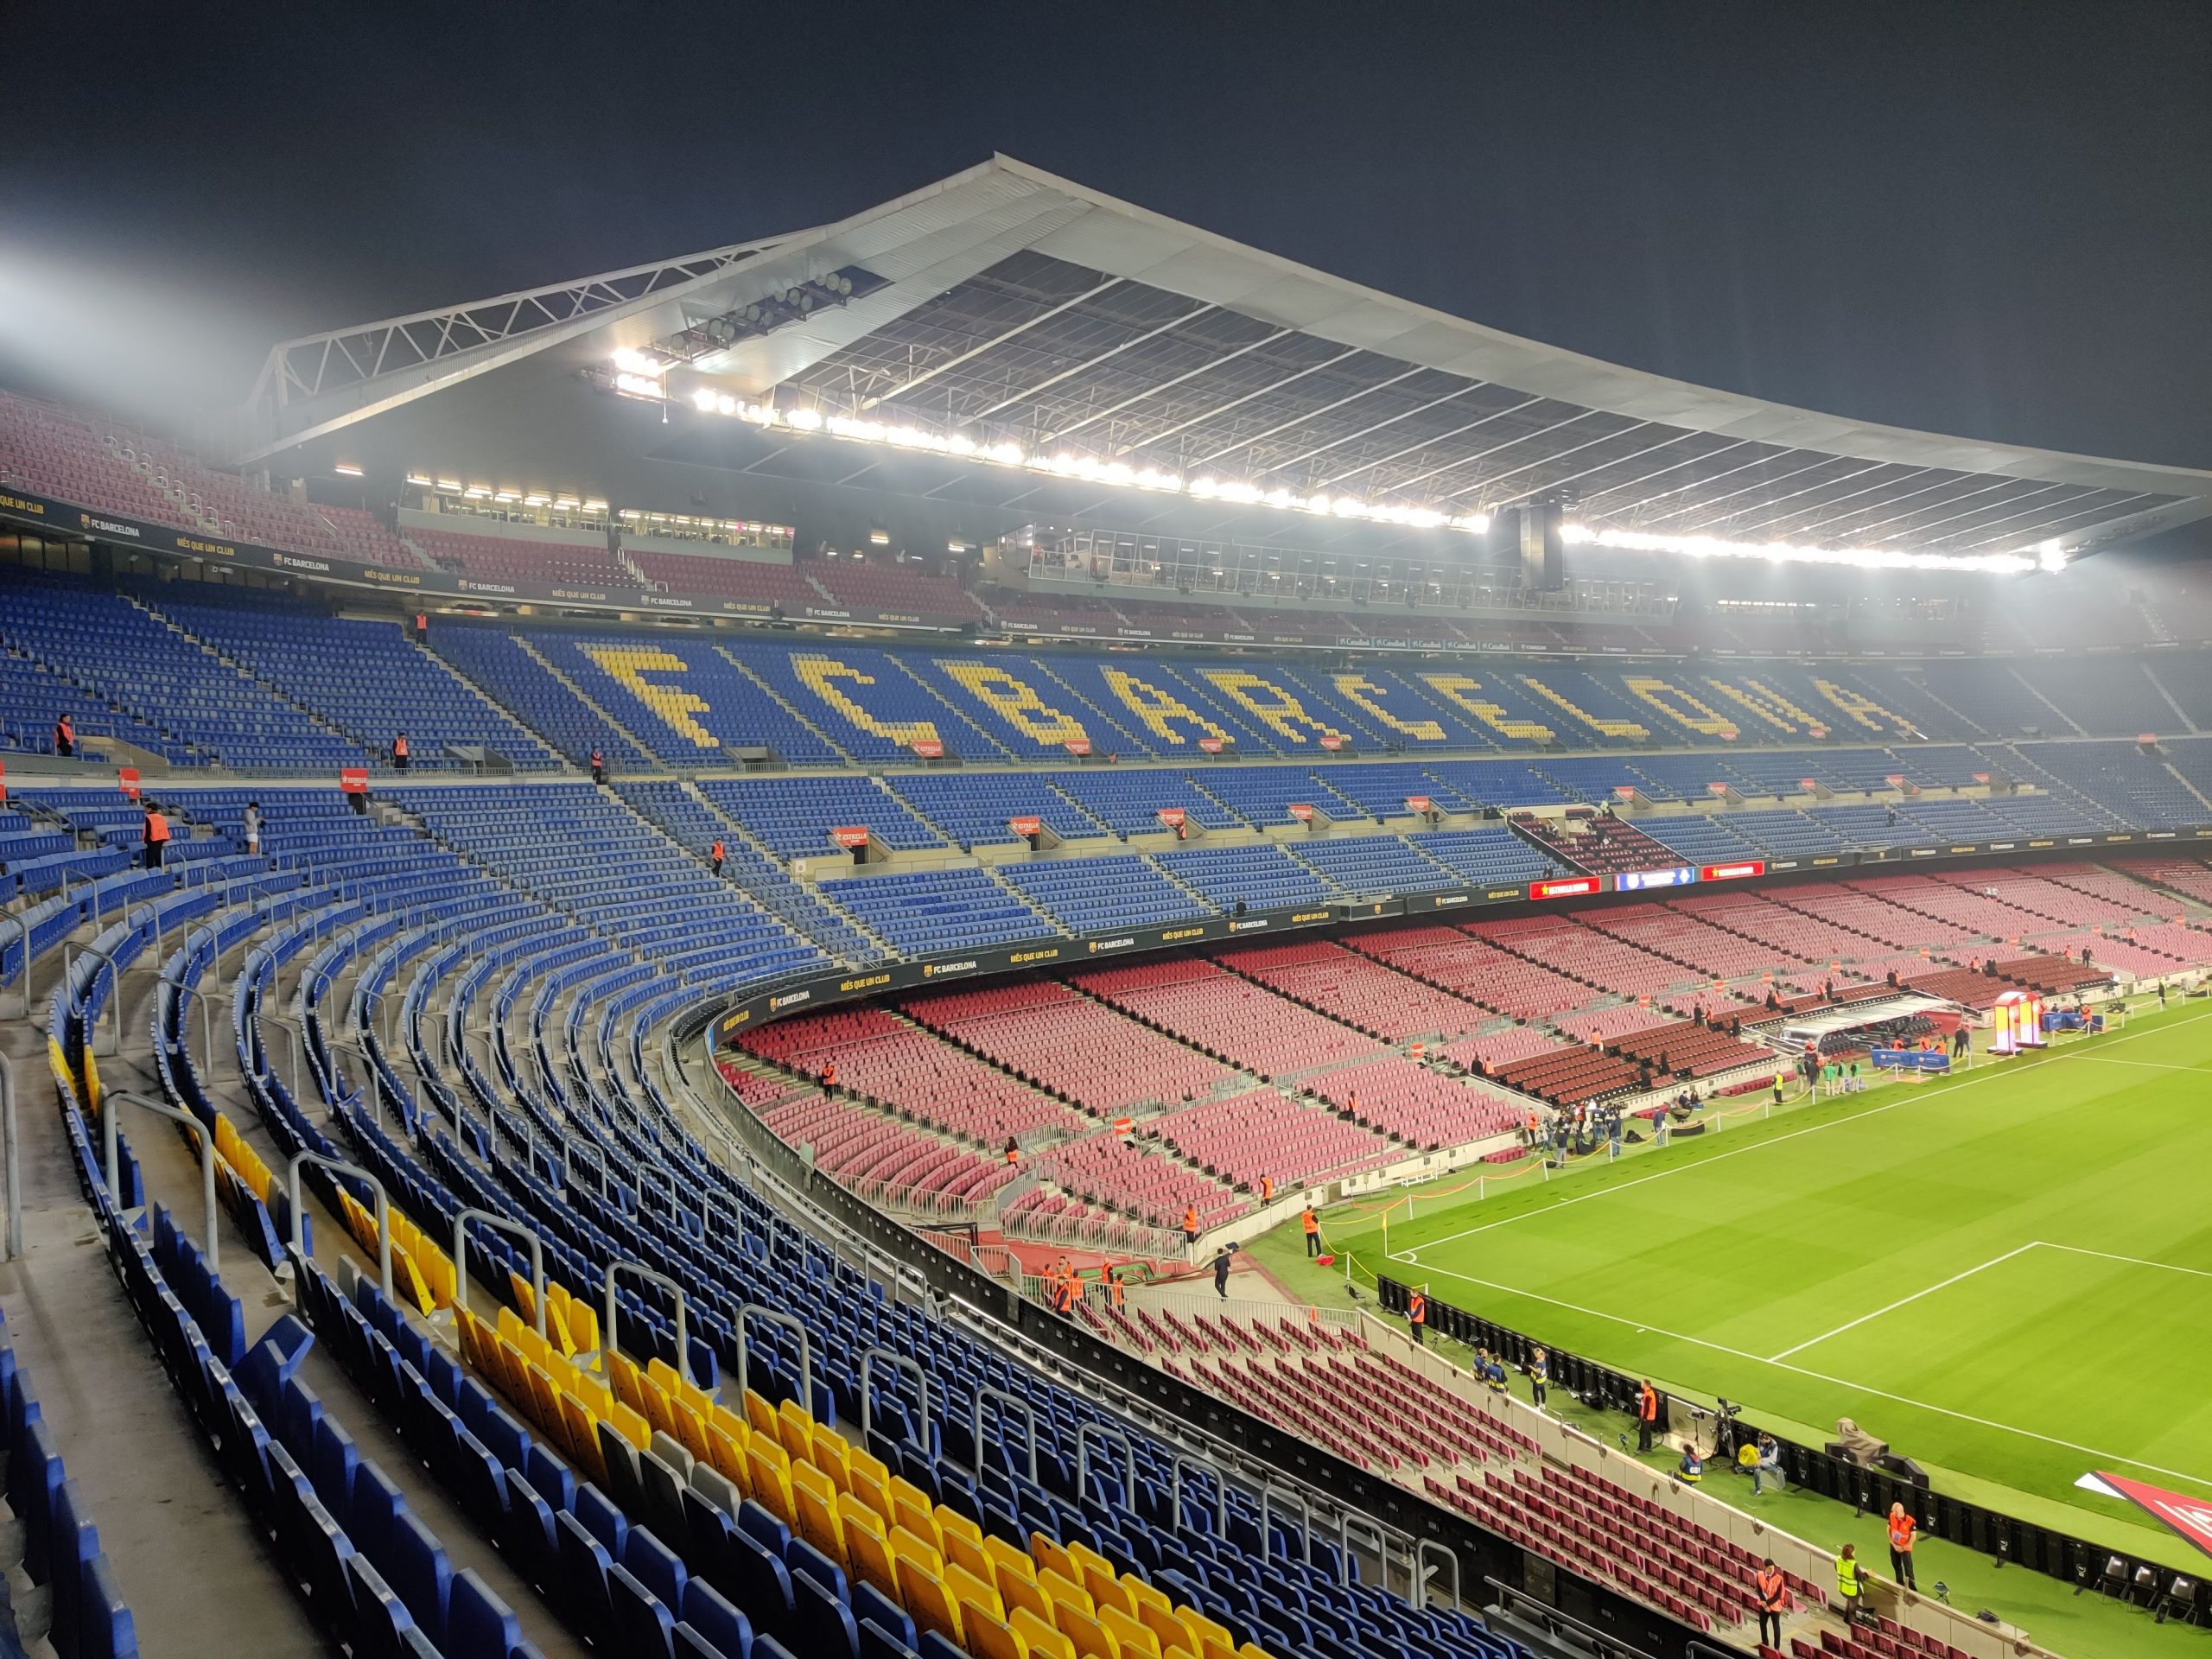 The Camp Nou, ahead of Barcelona's game against Real Valladolid back in October 2019 / OMAR HAWWASH/BLAUGRANAGRAM